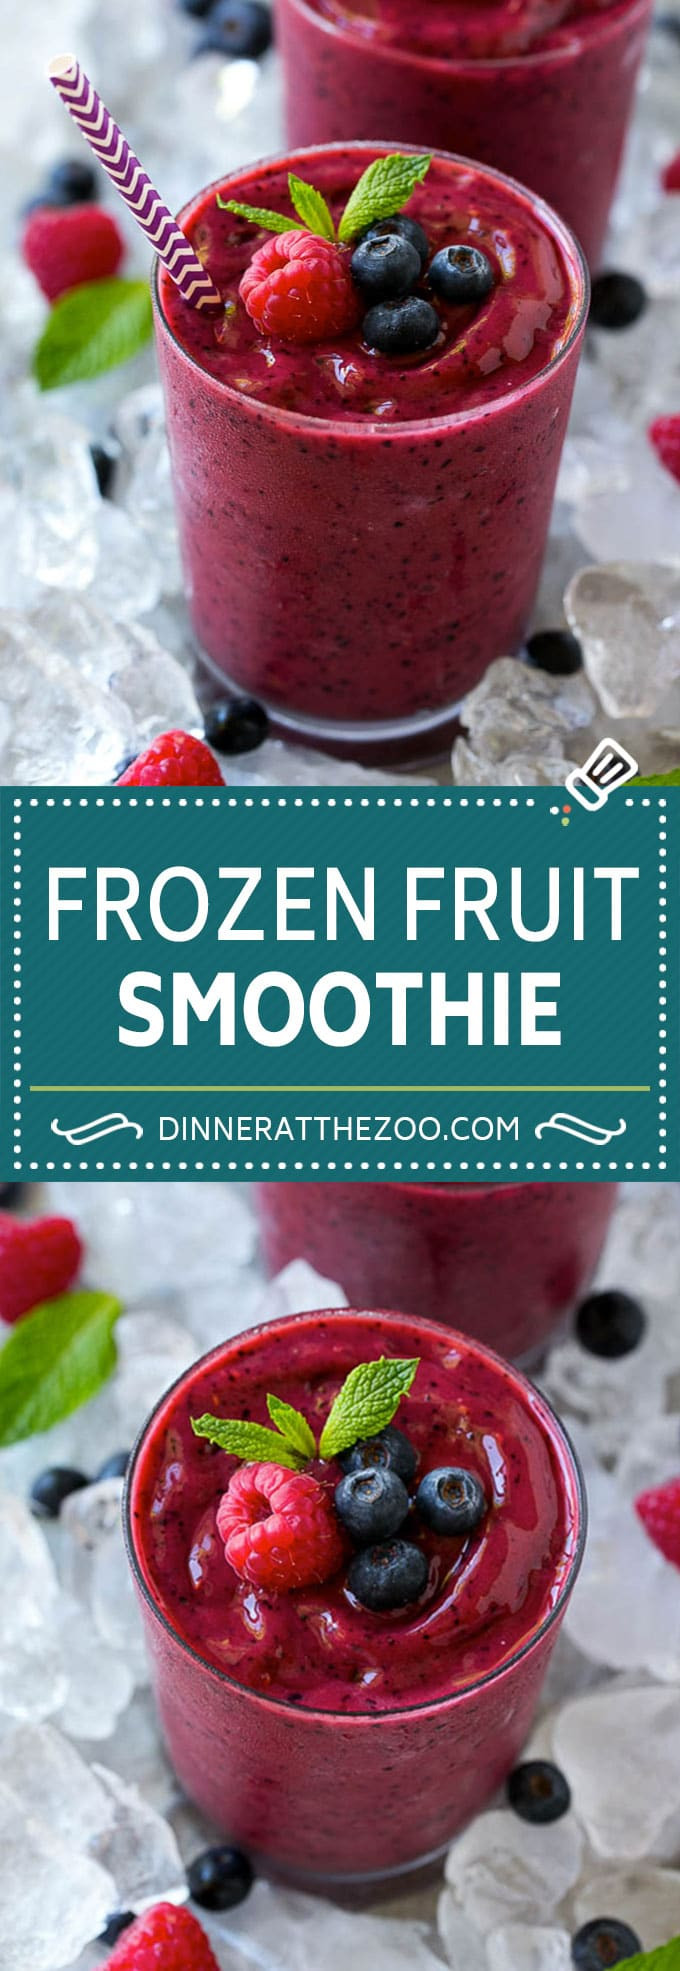 Freezing Fruit For Smoothies
 Frozen Fruit Smoothie Dinner at the Zoo